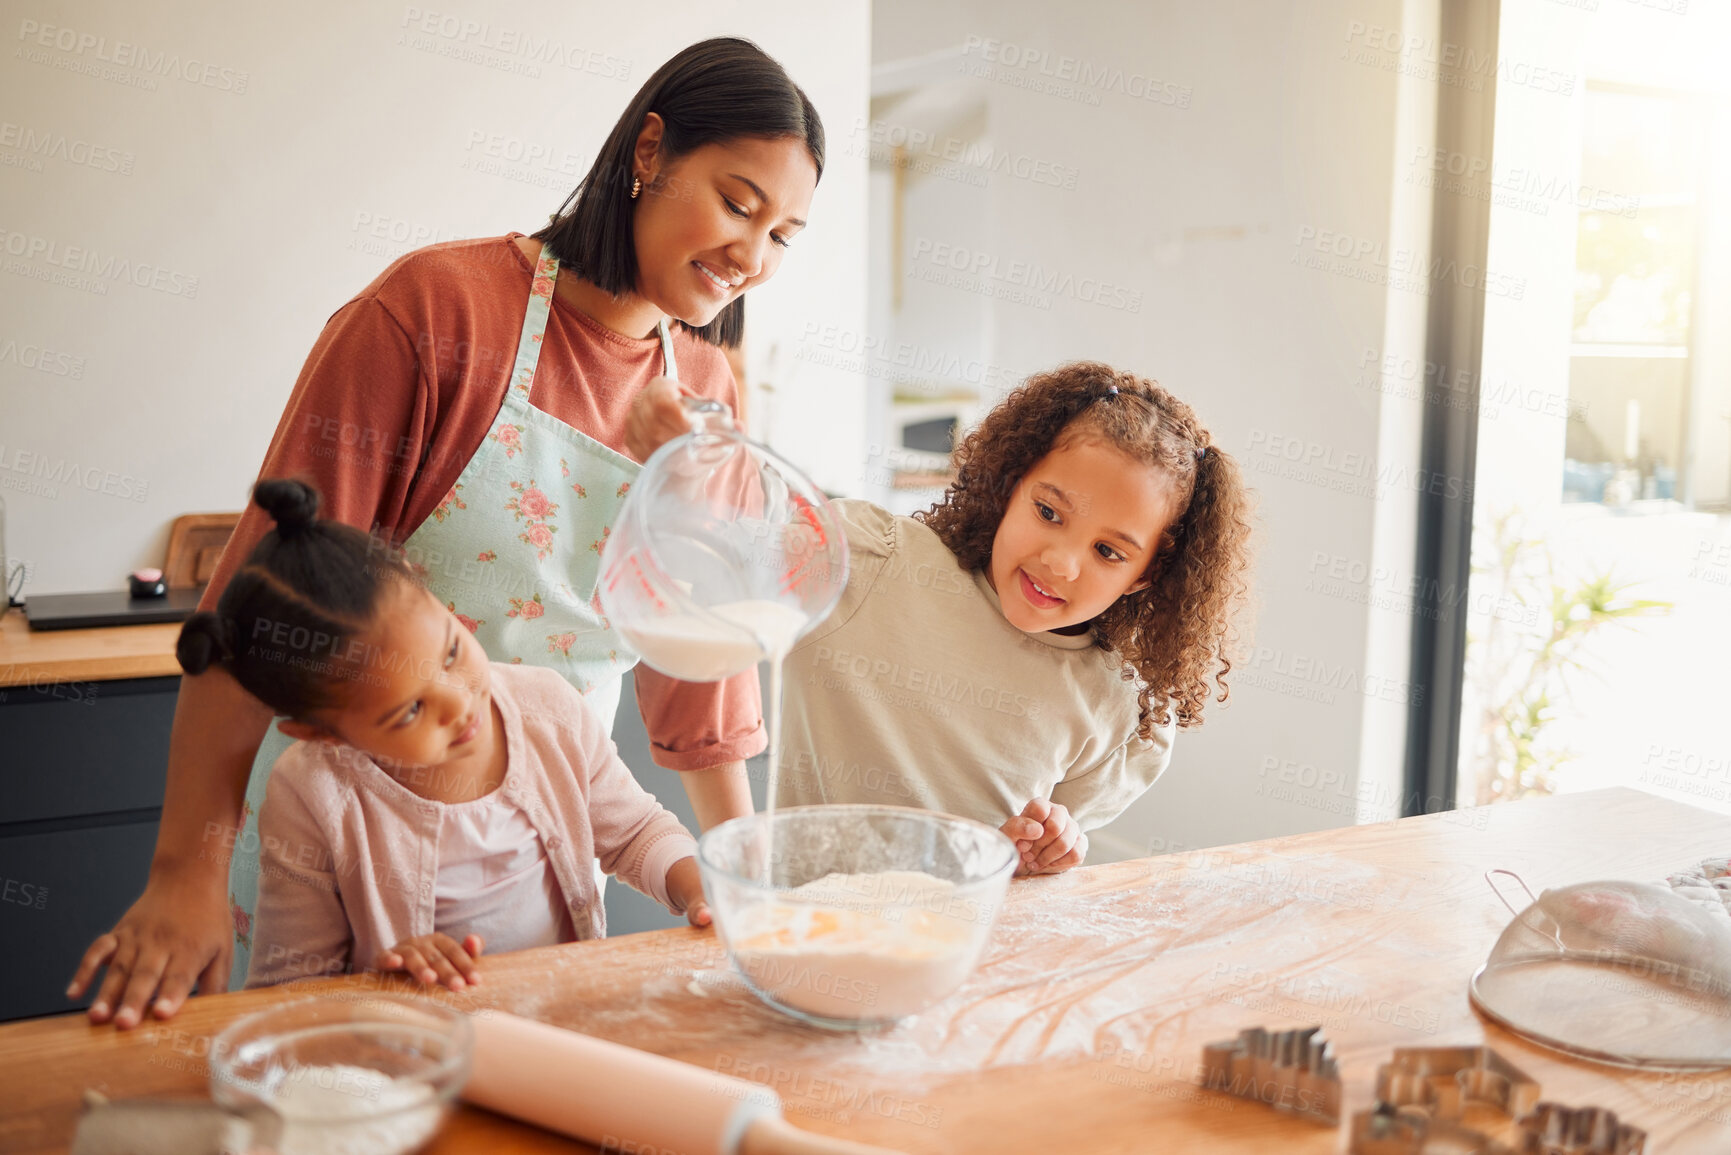 Buy stock photo Females only, happy mixed race family of three cooking in a messy kitchen together. Loving black single parent bonding with her daughters while teaching them domestic skills at home